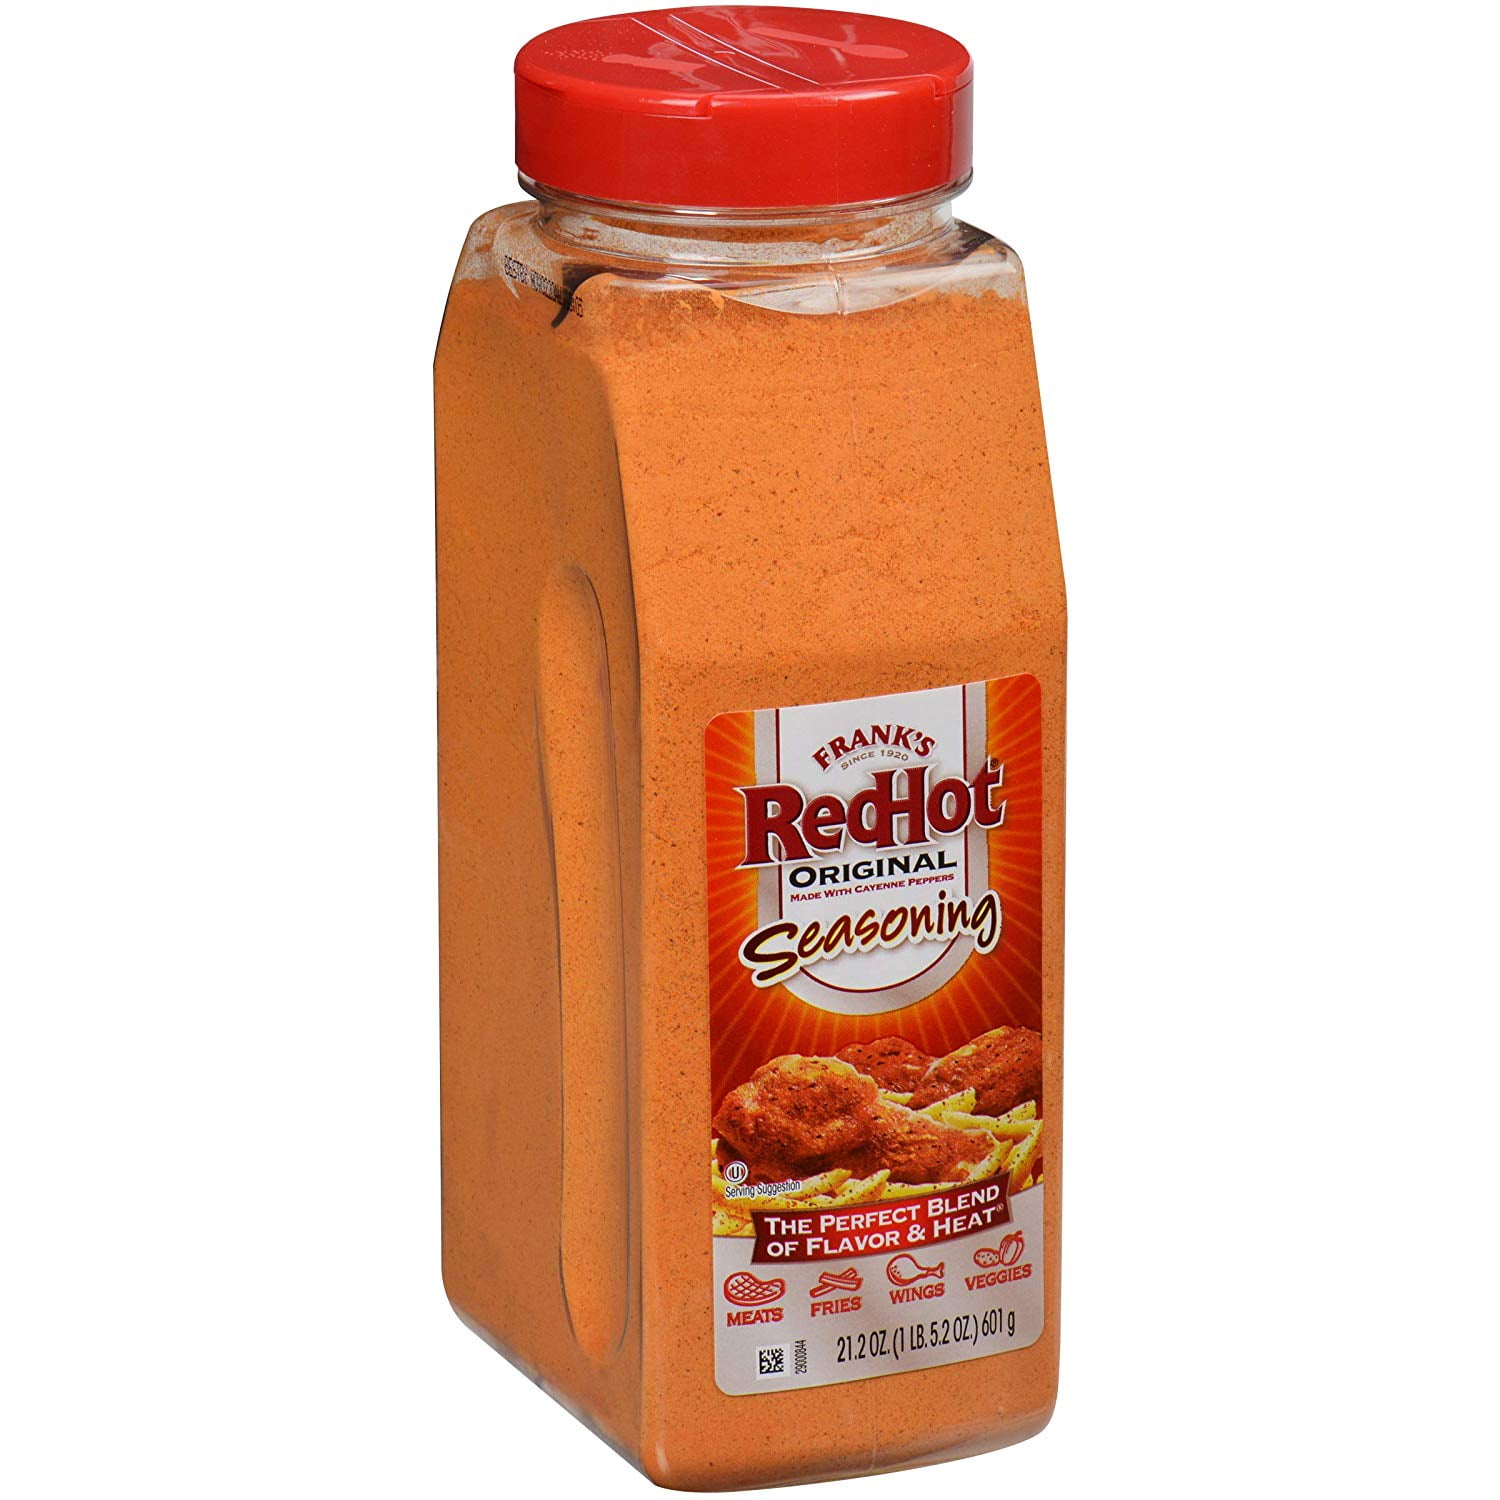 Versatile seasoning adds the great flavor of Franks red hot sauce to a vari...